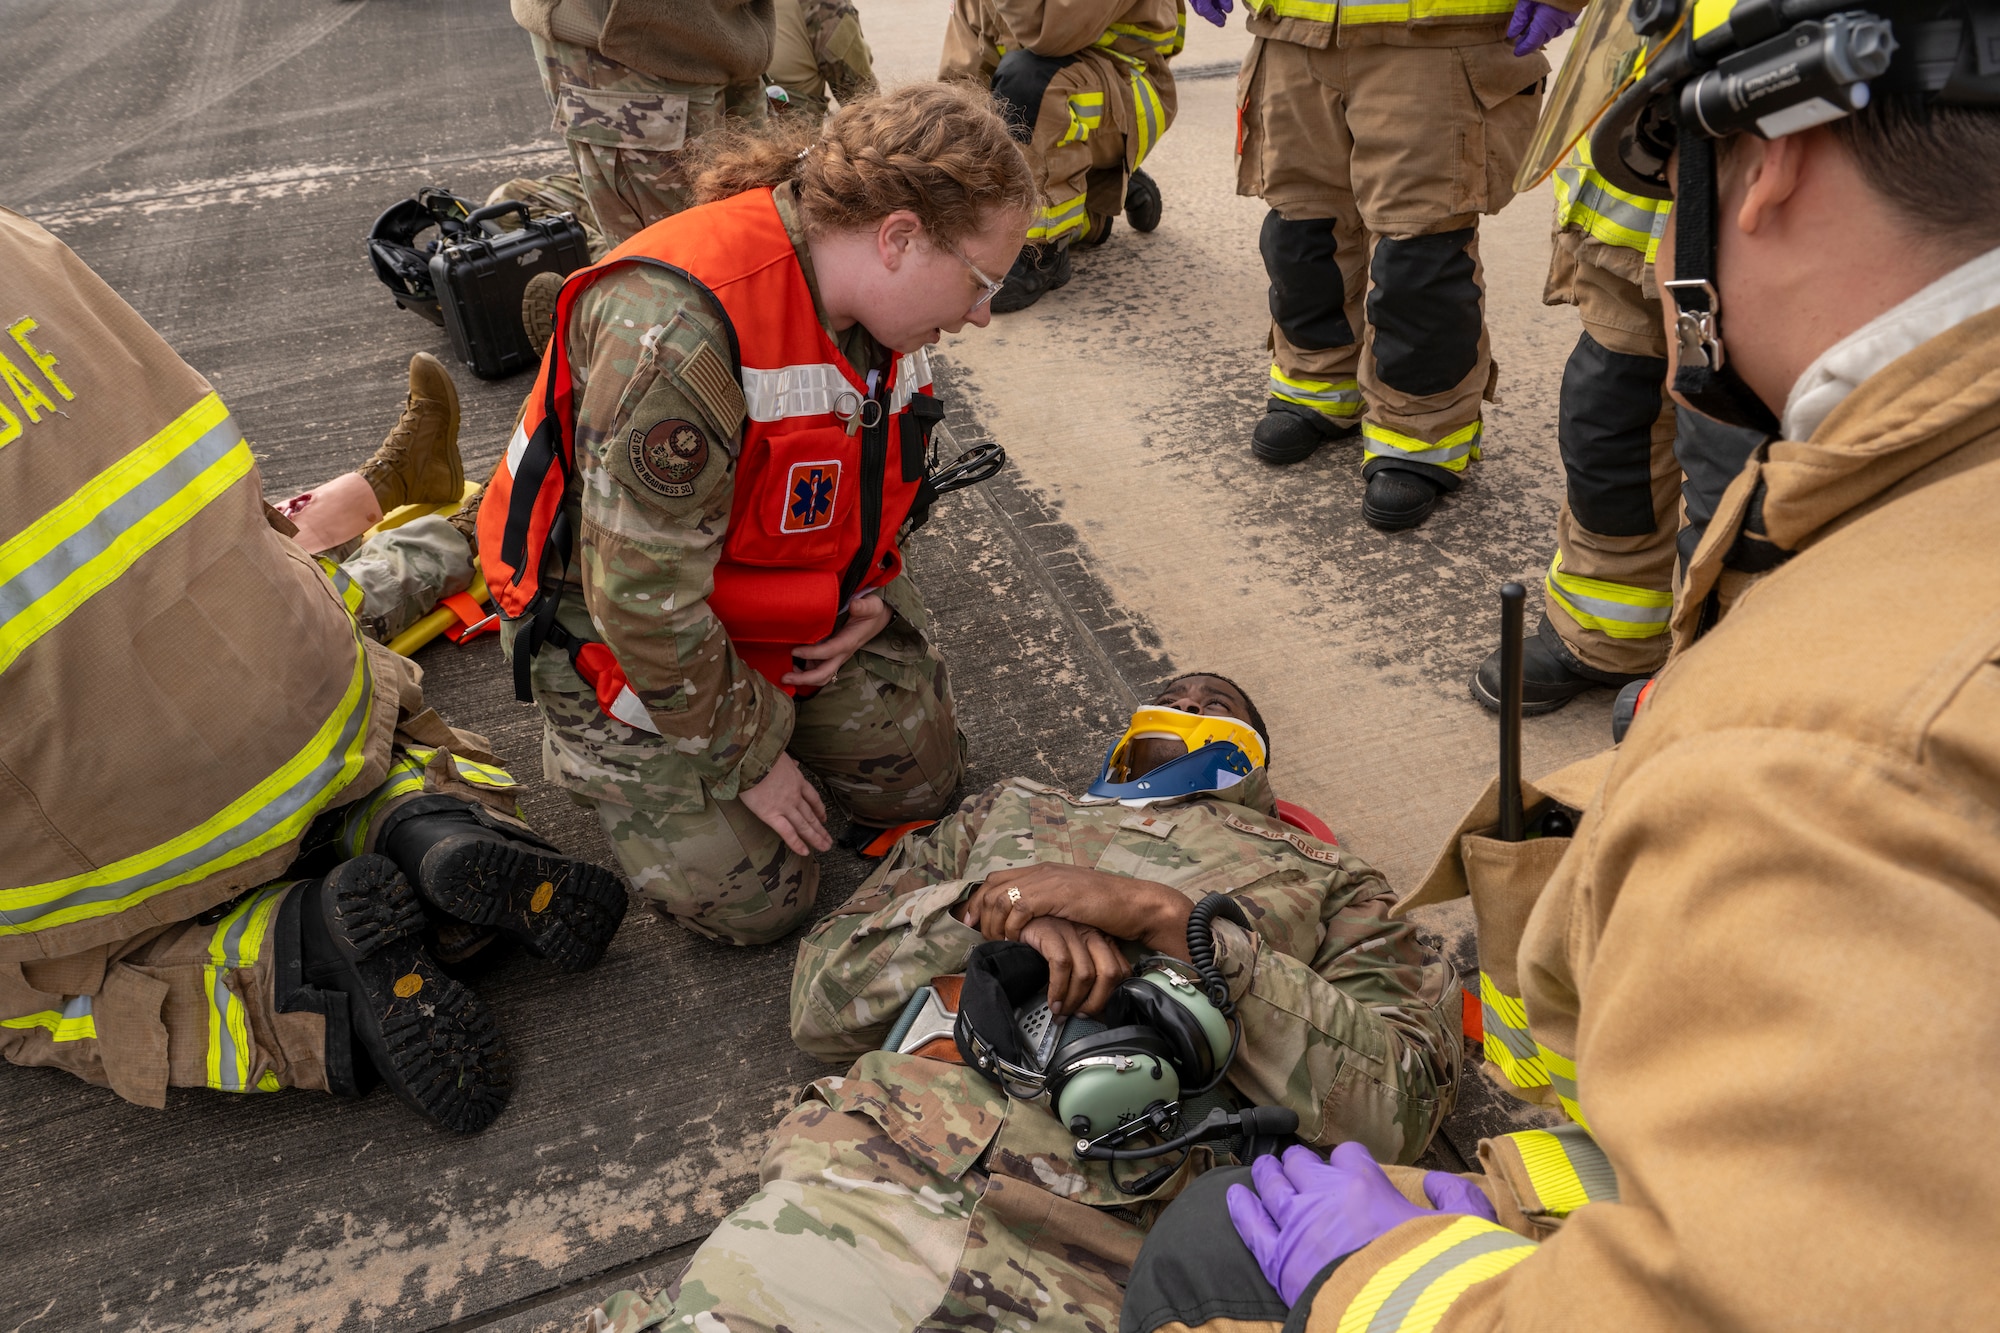 U.S. Air Force Staff Sgt. Allison Gibree, 23rd Medical Group Flight and Operational Medicine Clinic noncommissioned officer in charge, assesses a simulated patient during an aircraft accident response exercise at Moody Air Force Base, Georgia, March 26, 2024. This home-station exercise simulated a hard landing of an HH-60W Jolly Green II, resulting in injured aircrew members. The scenario tested the communication and response of Moody AFB Airmen from various organizations across the 23rd Wing. (U.S. Air Force photo by Senior Airman Deanna Muir)